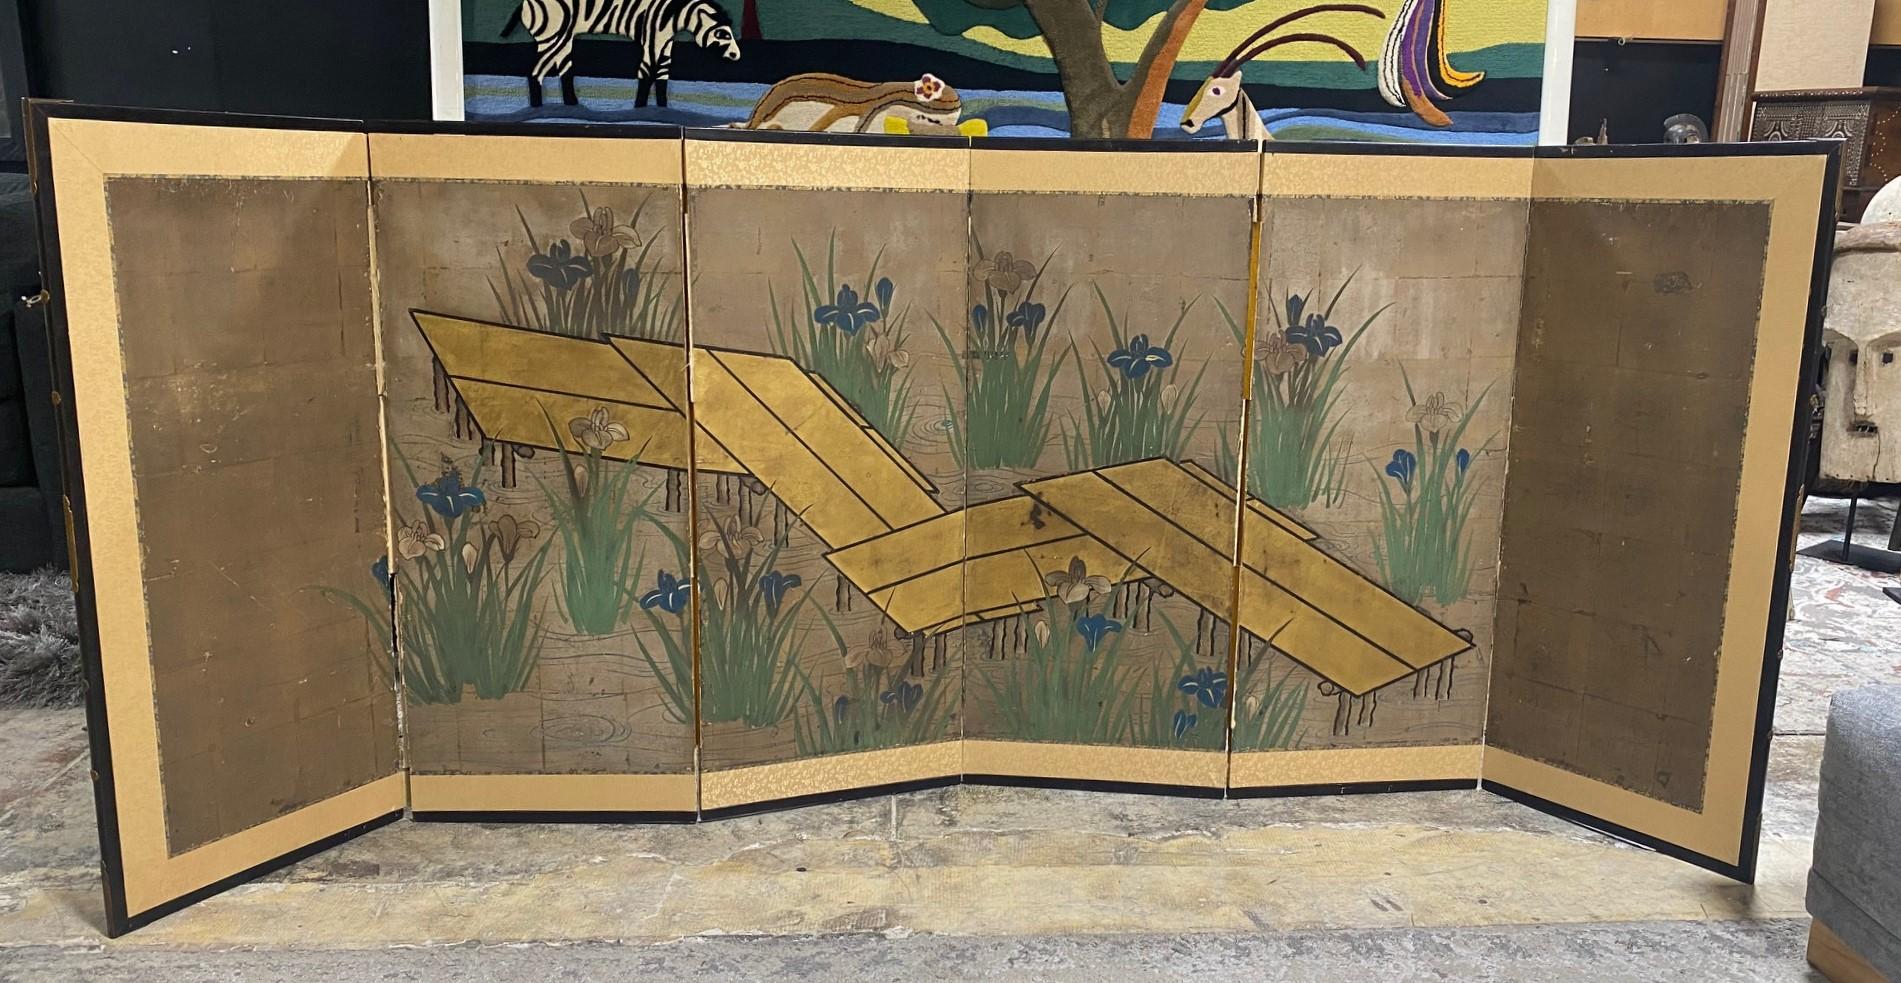 A gorgeous six-panel Japanese Byobu folding screen depicting a nature lake/landscape scene with a water walkway/angular bridge and blossoming iris flowers - perhaps an homage to the famed Irises screens by the famed Japanese artist Ogata Korin